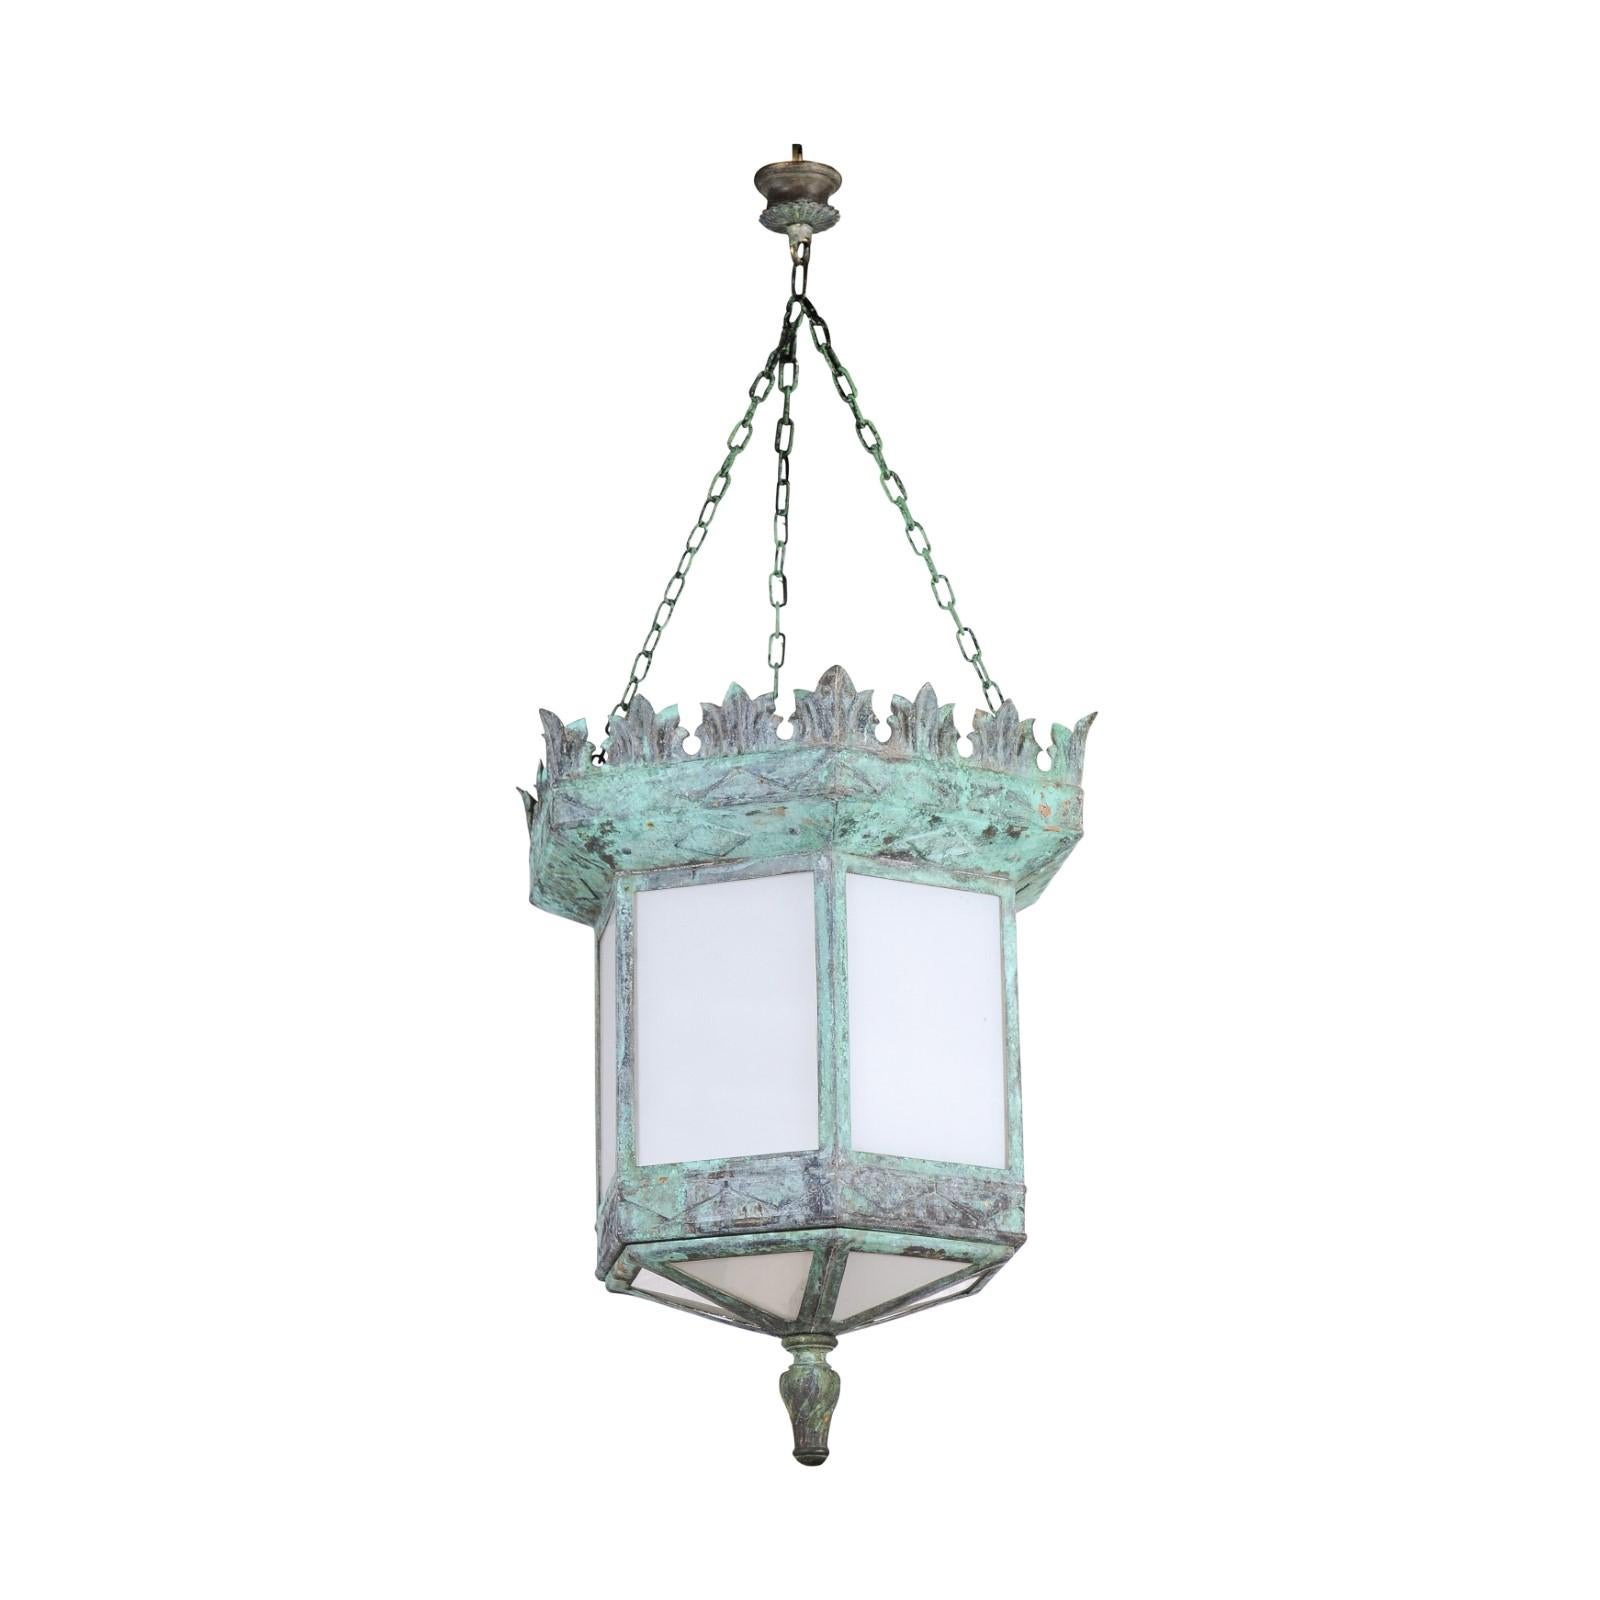 A French Art Deco hexagonal hanging lantern from the early 20th century with milk glass and verdigris patina. Created in France during the first quarter of the 20th century, this Art Deco lantern features an hexagonal body securing milk glass